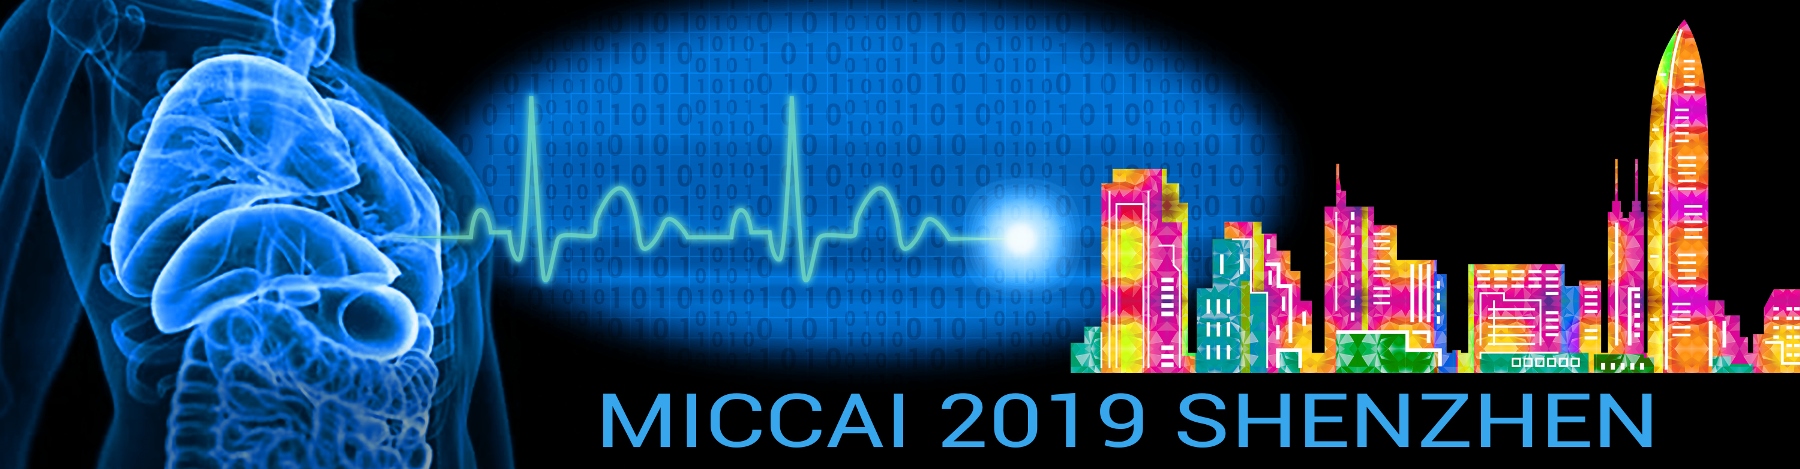 22nd International Conference on Medical Image Computing and Computer Assisted Intervention MICCAI 2019